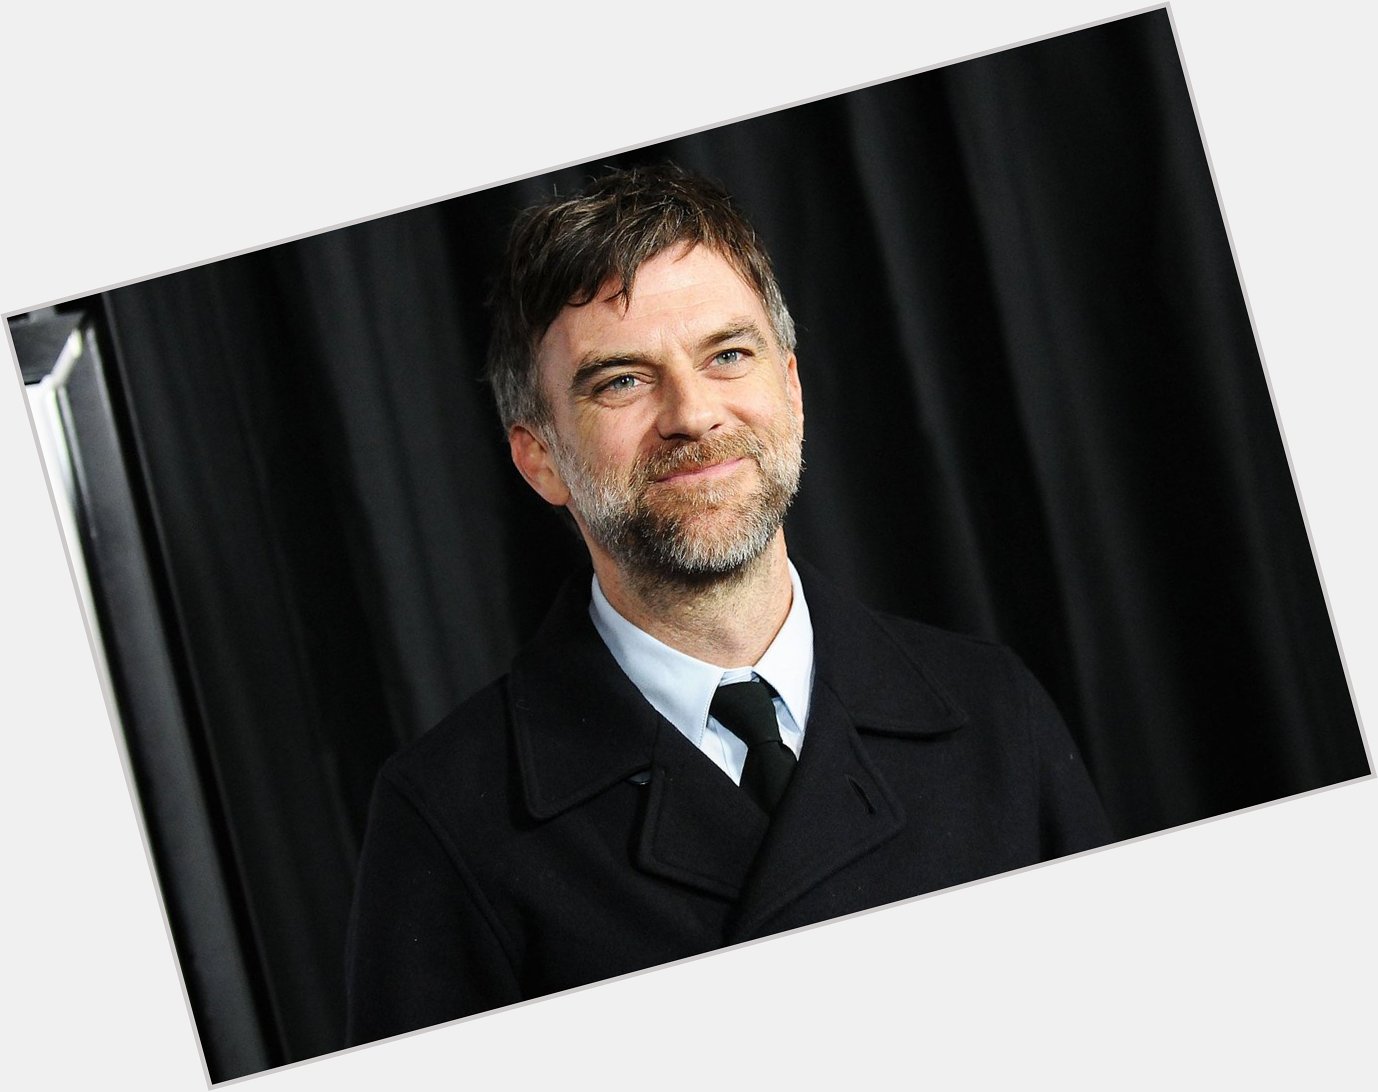 Happy 47th Birthday to one of the greatest directors working today, Paul Thomas Anderson! 